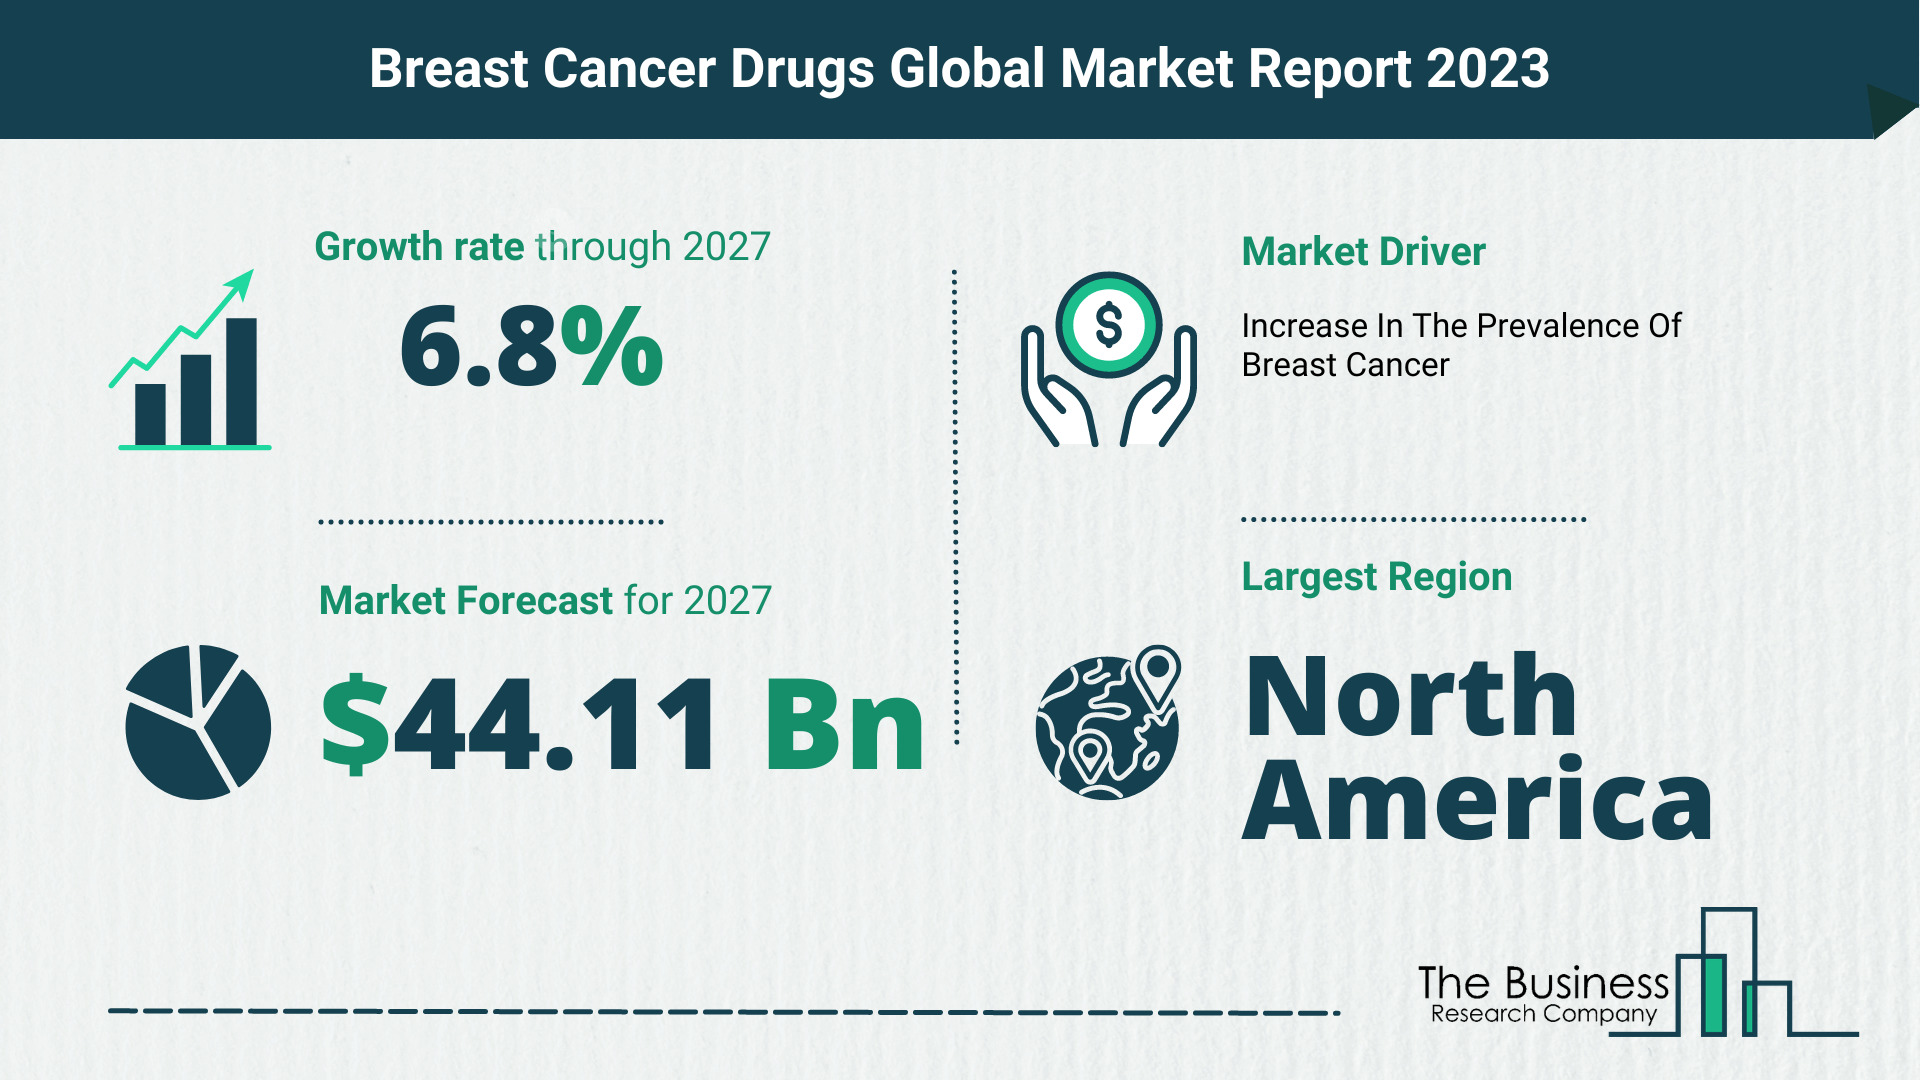 Global Breast Cancer Drugs Market Opportunities And Strategies 2023